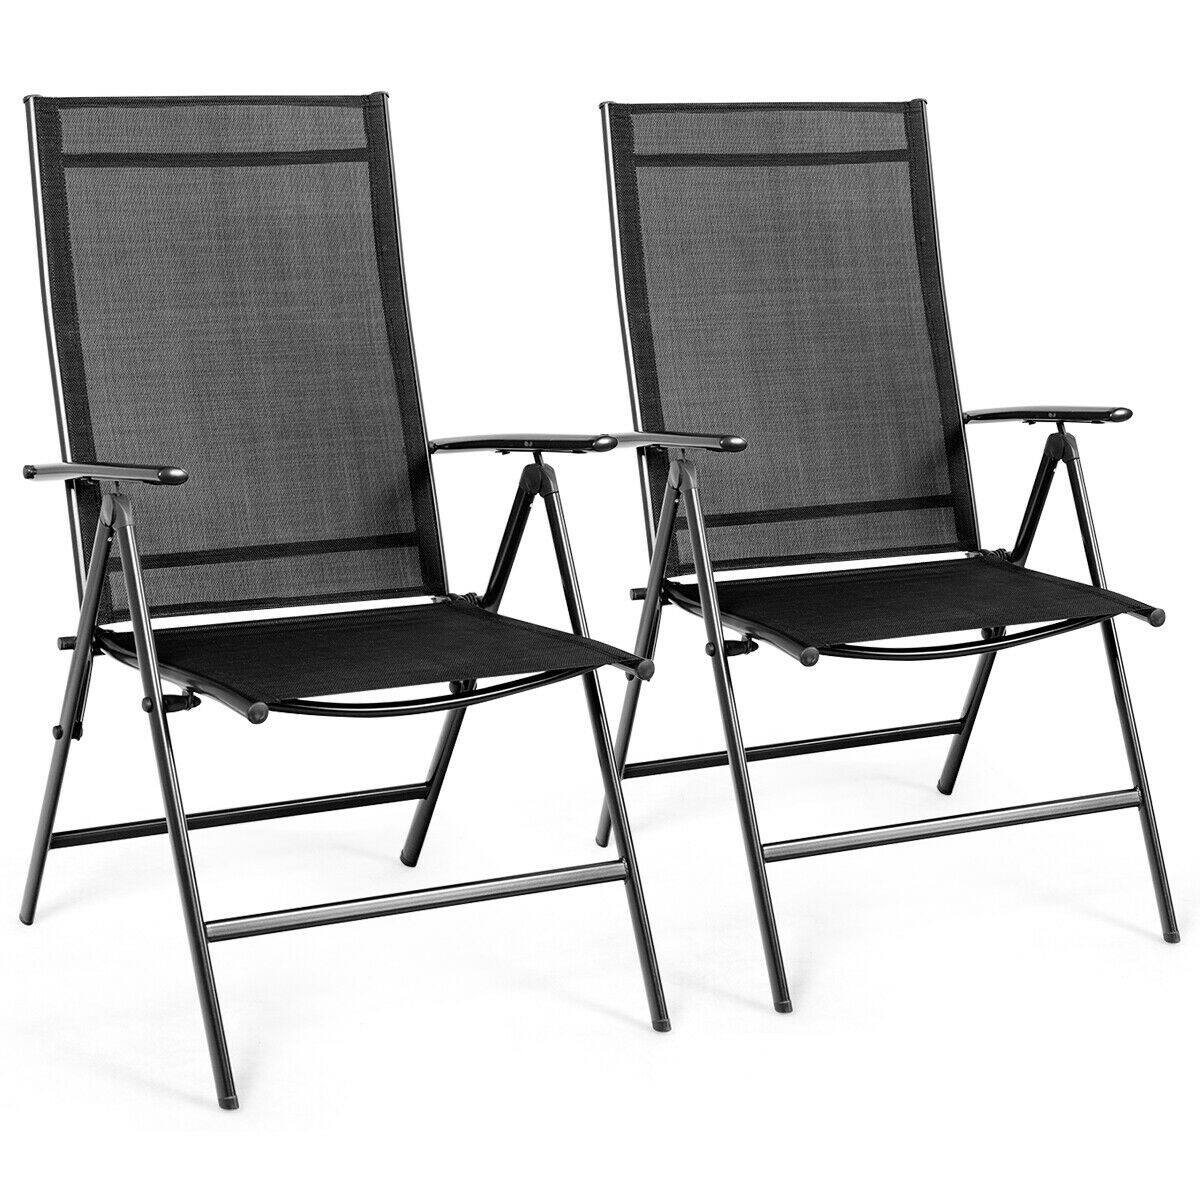 Costway Set of 2 Adjustable Portable Patio Folding Dining Chair Recliner - $78.95 + Free Shipping